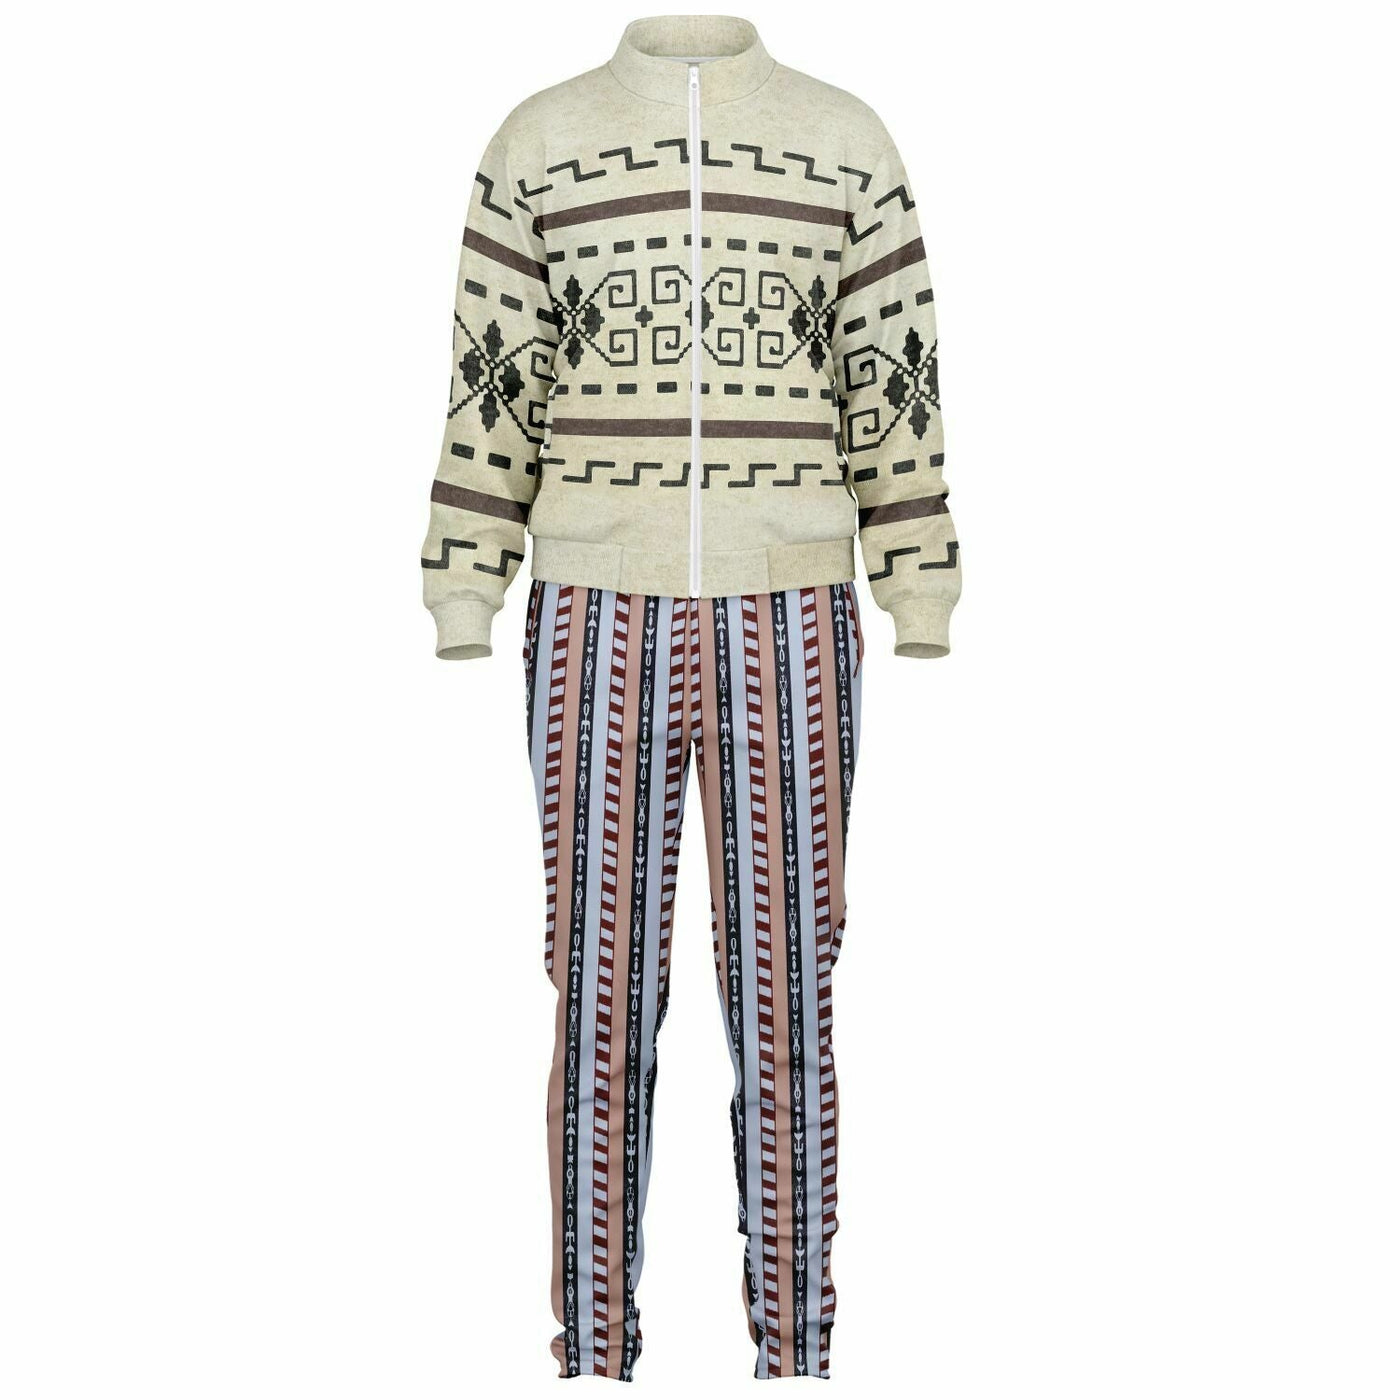 The Dude Tracksuit Outfit with Classic Lebowski Patterns